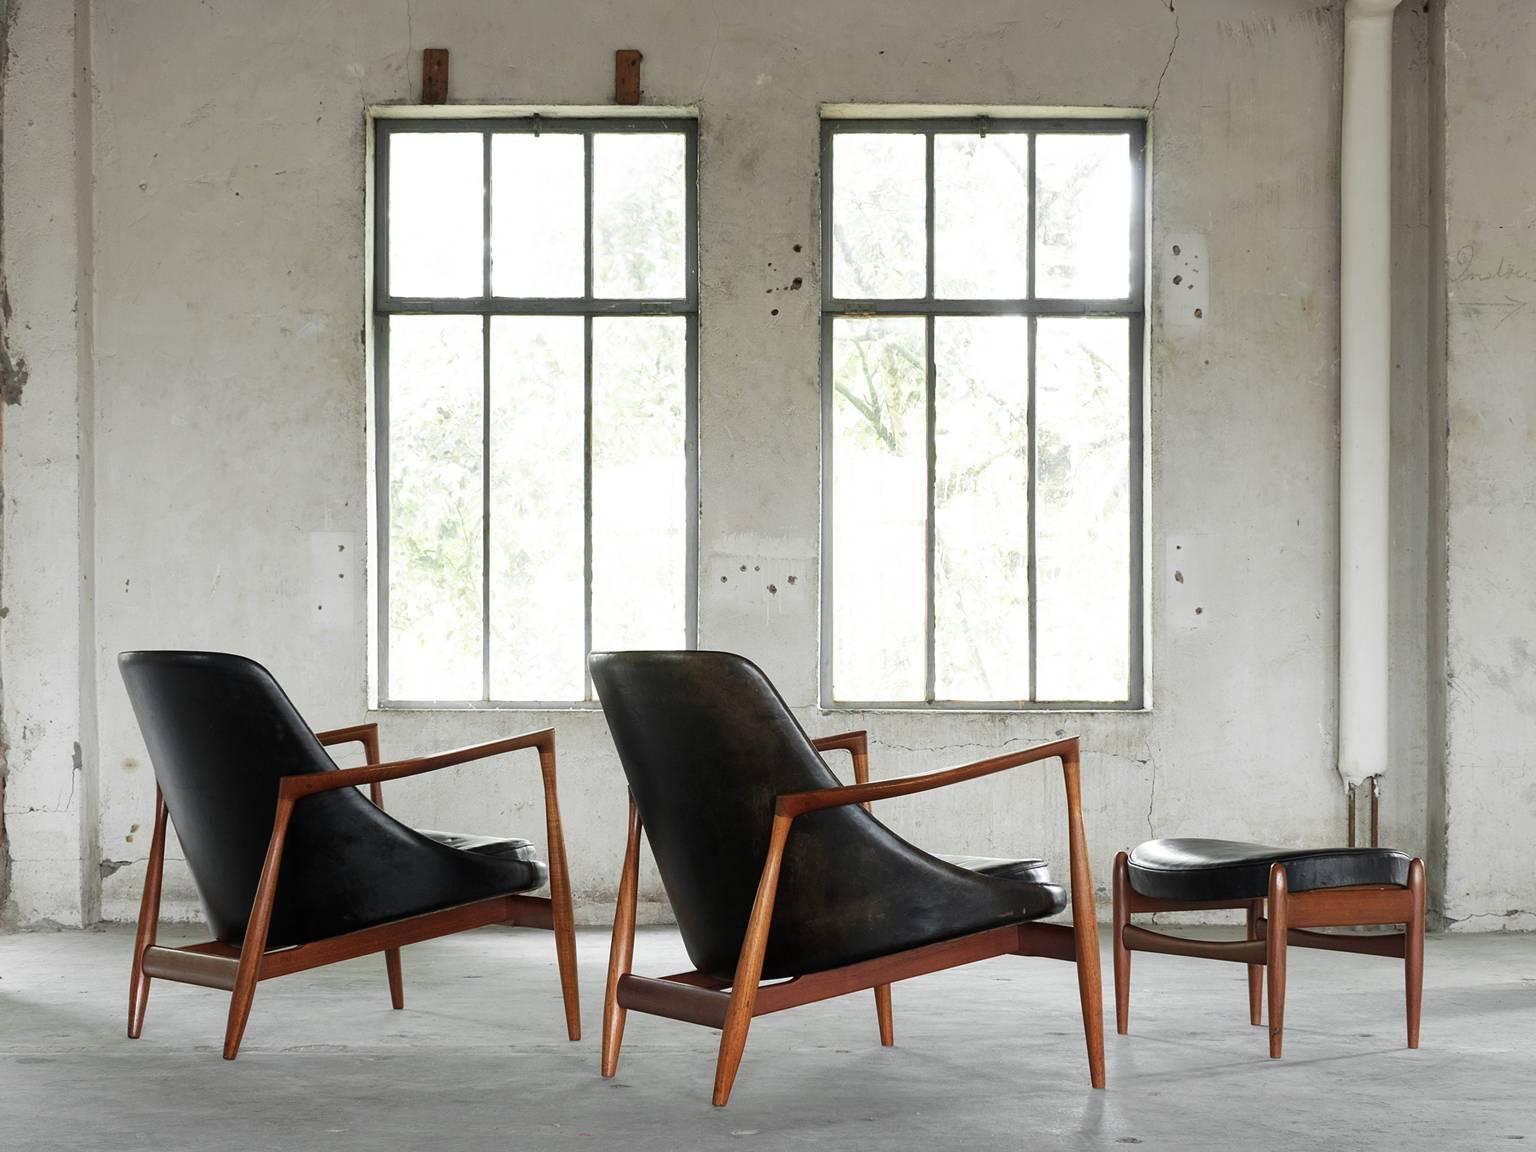 Danish Set of Two Elizabeth Chairs in Patinated Black Leather by Ib Kofod-Larsen